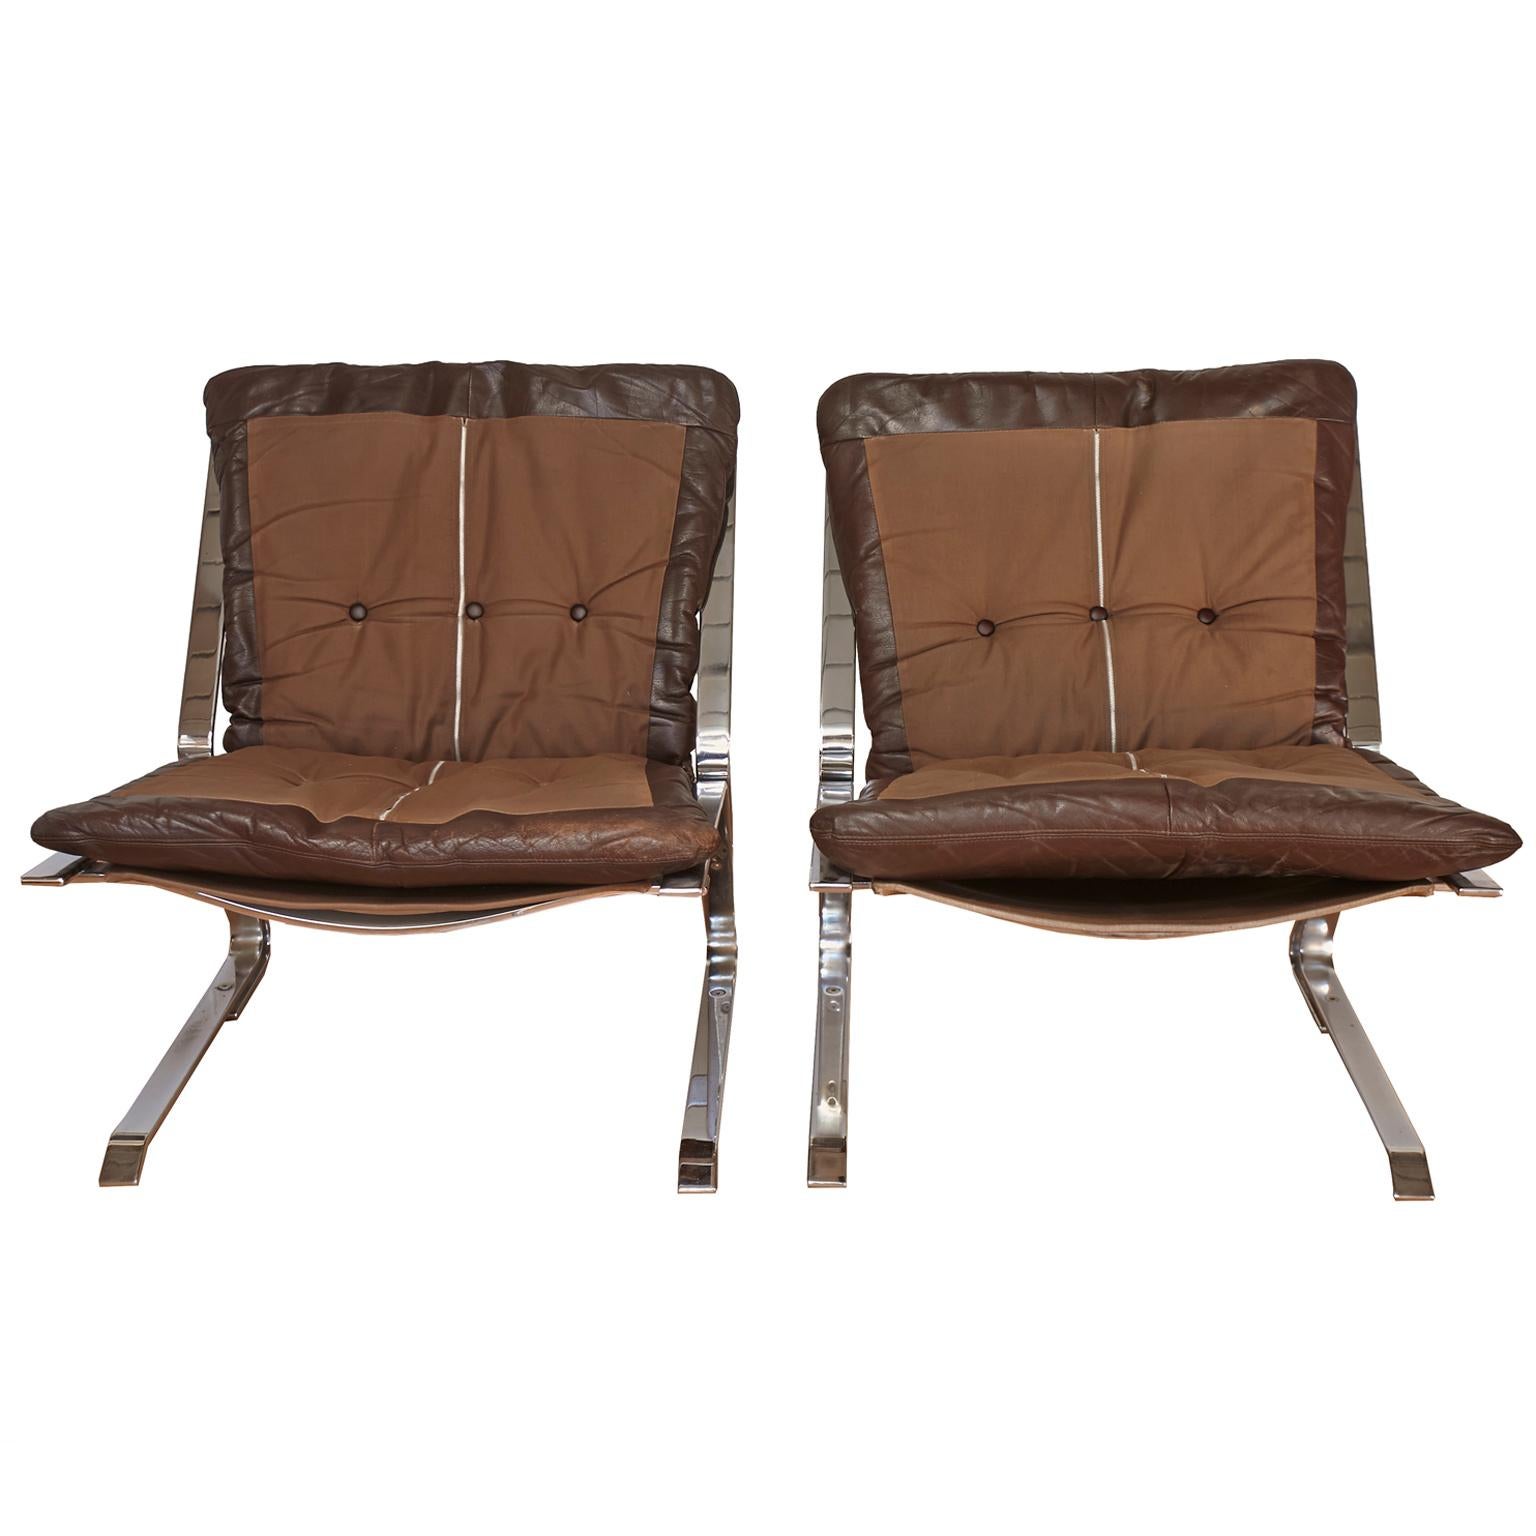 Pair of Brown Leather Pirate Chairs by Elsa and Nordahl Solheim for Rykken In Good Condition In Tucson, AZ